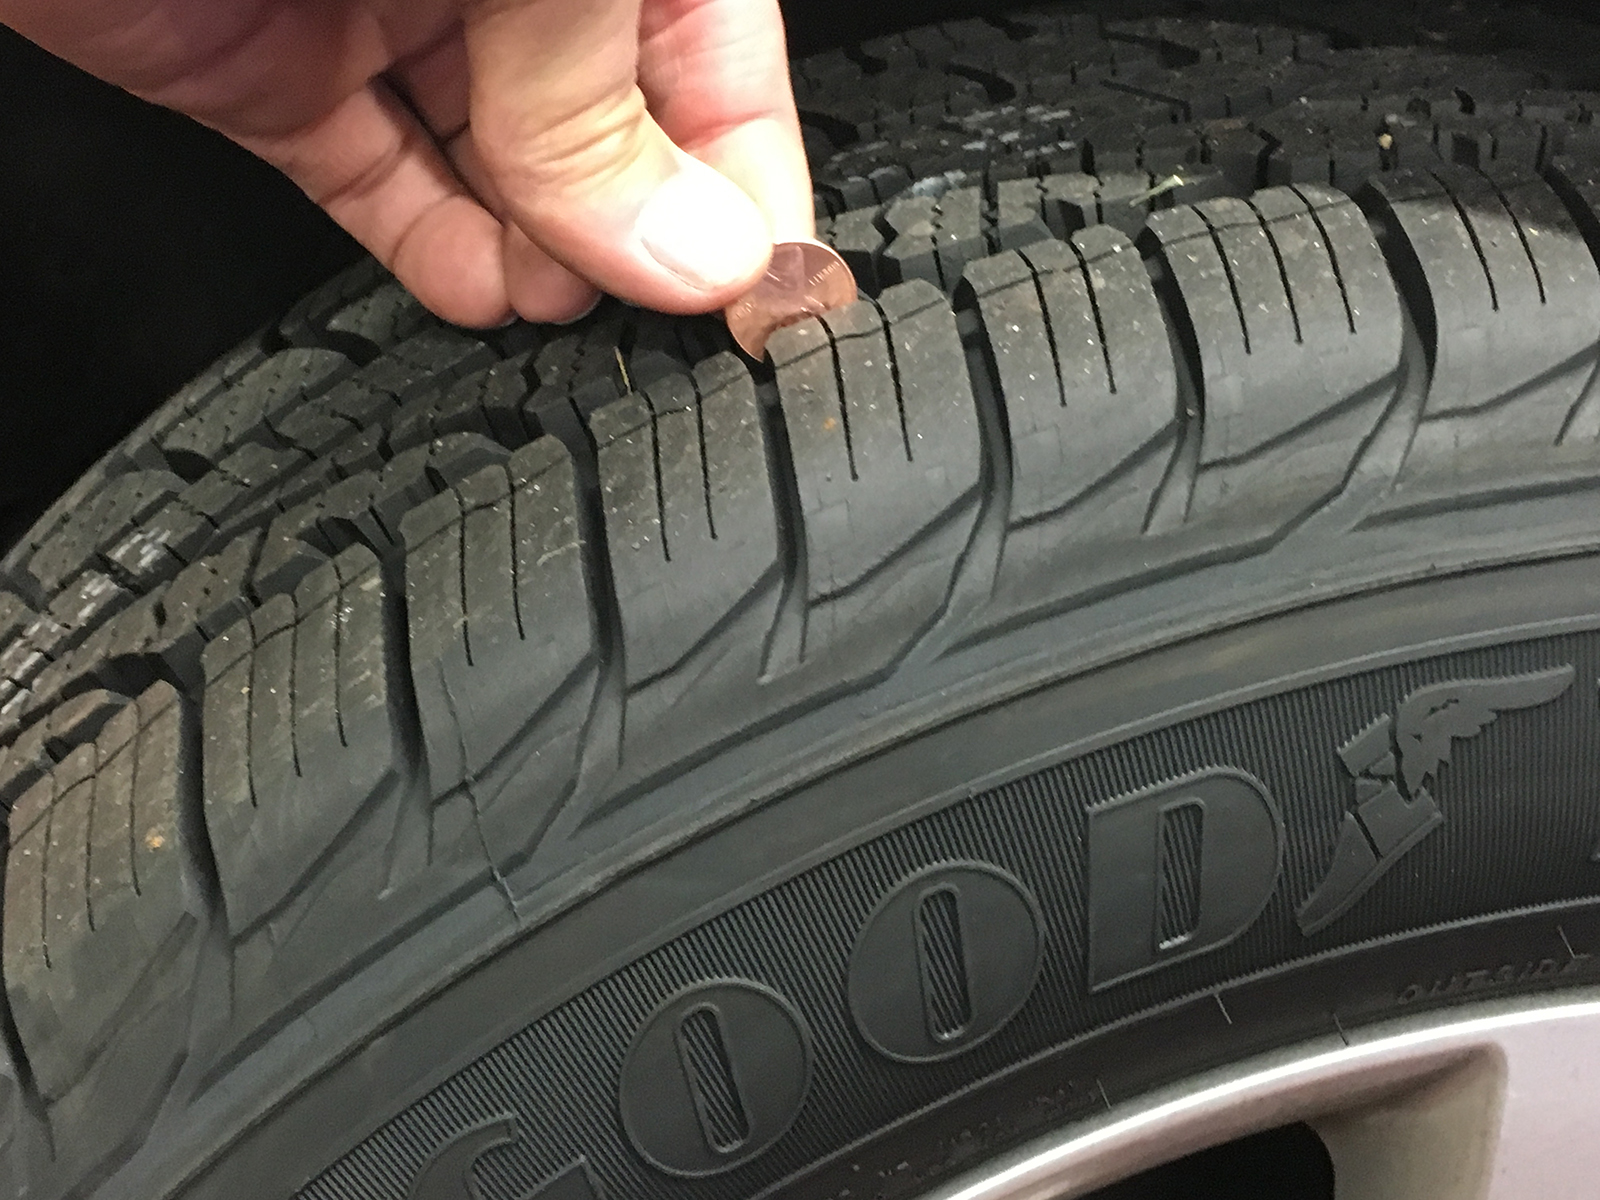 Using an upside down penny to measure the depth of a tire's tread